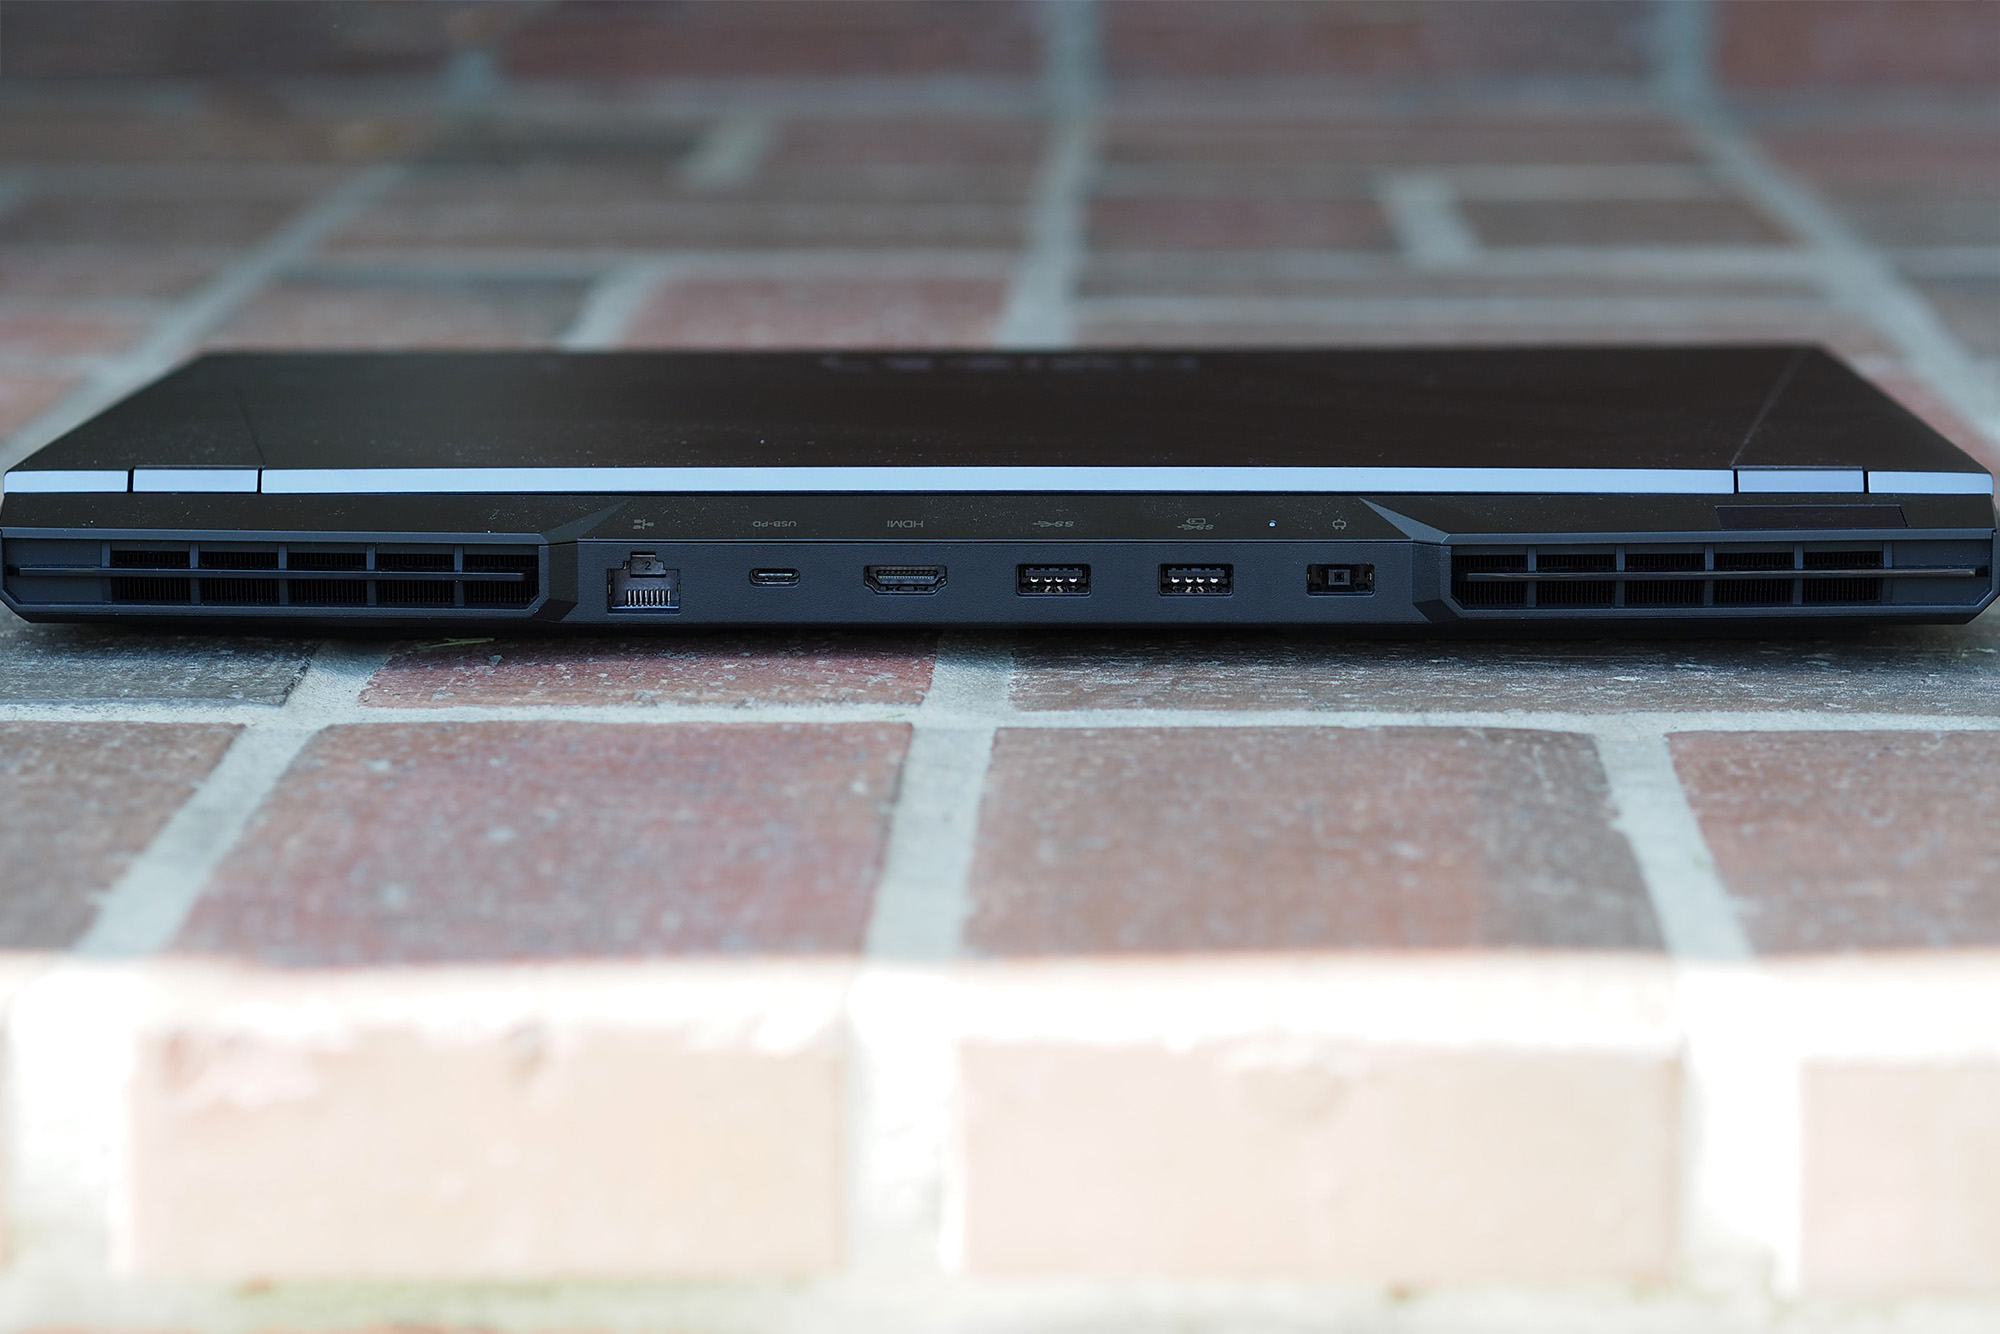 The backside of the Lenovo Legion 5i Pro features two USB-A 3.2 ports, a USB-C 3.2 port, a full-size HDMI 2.1 port, and an Ether